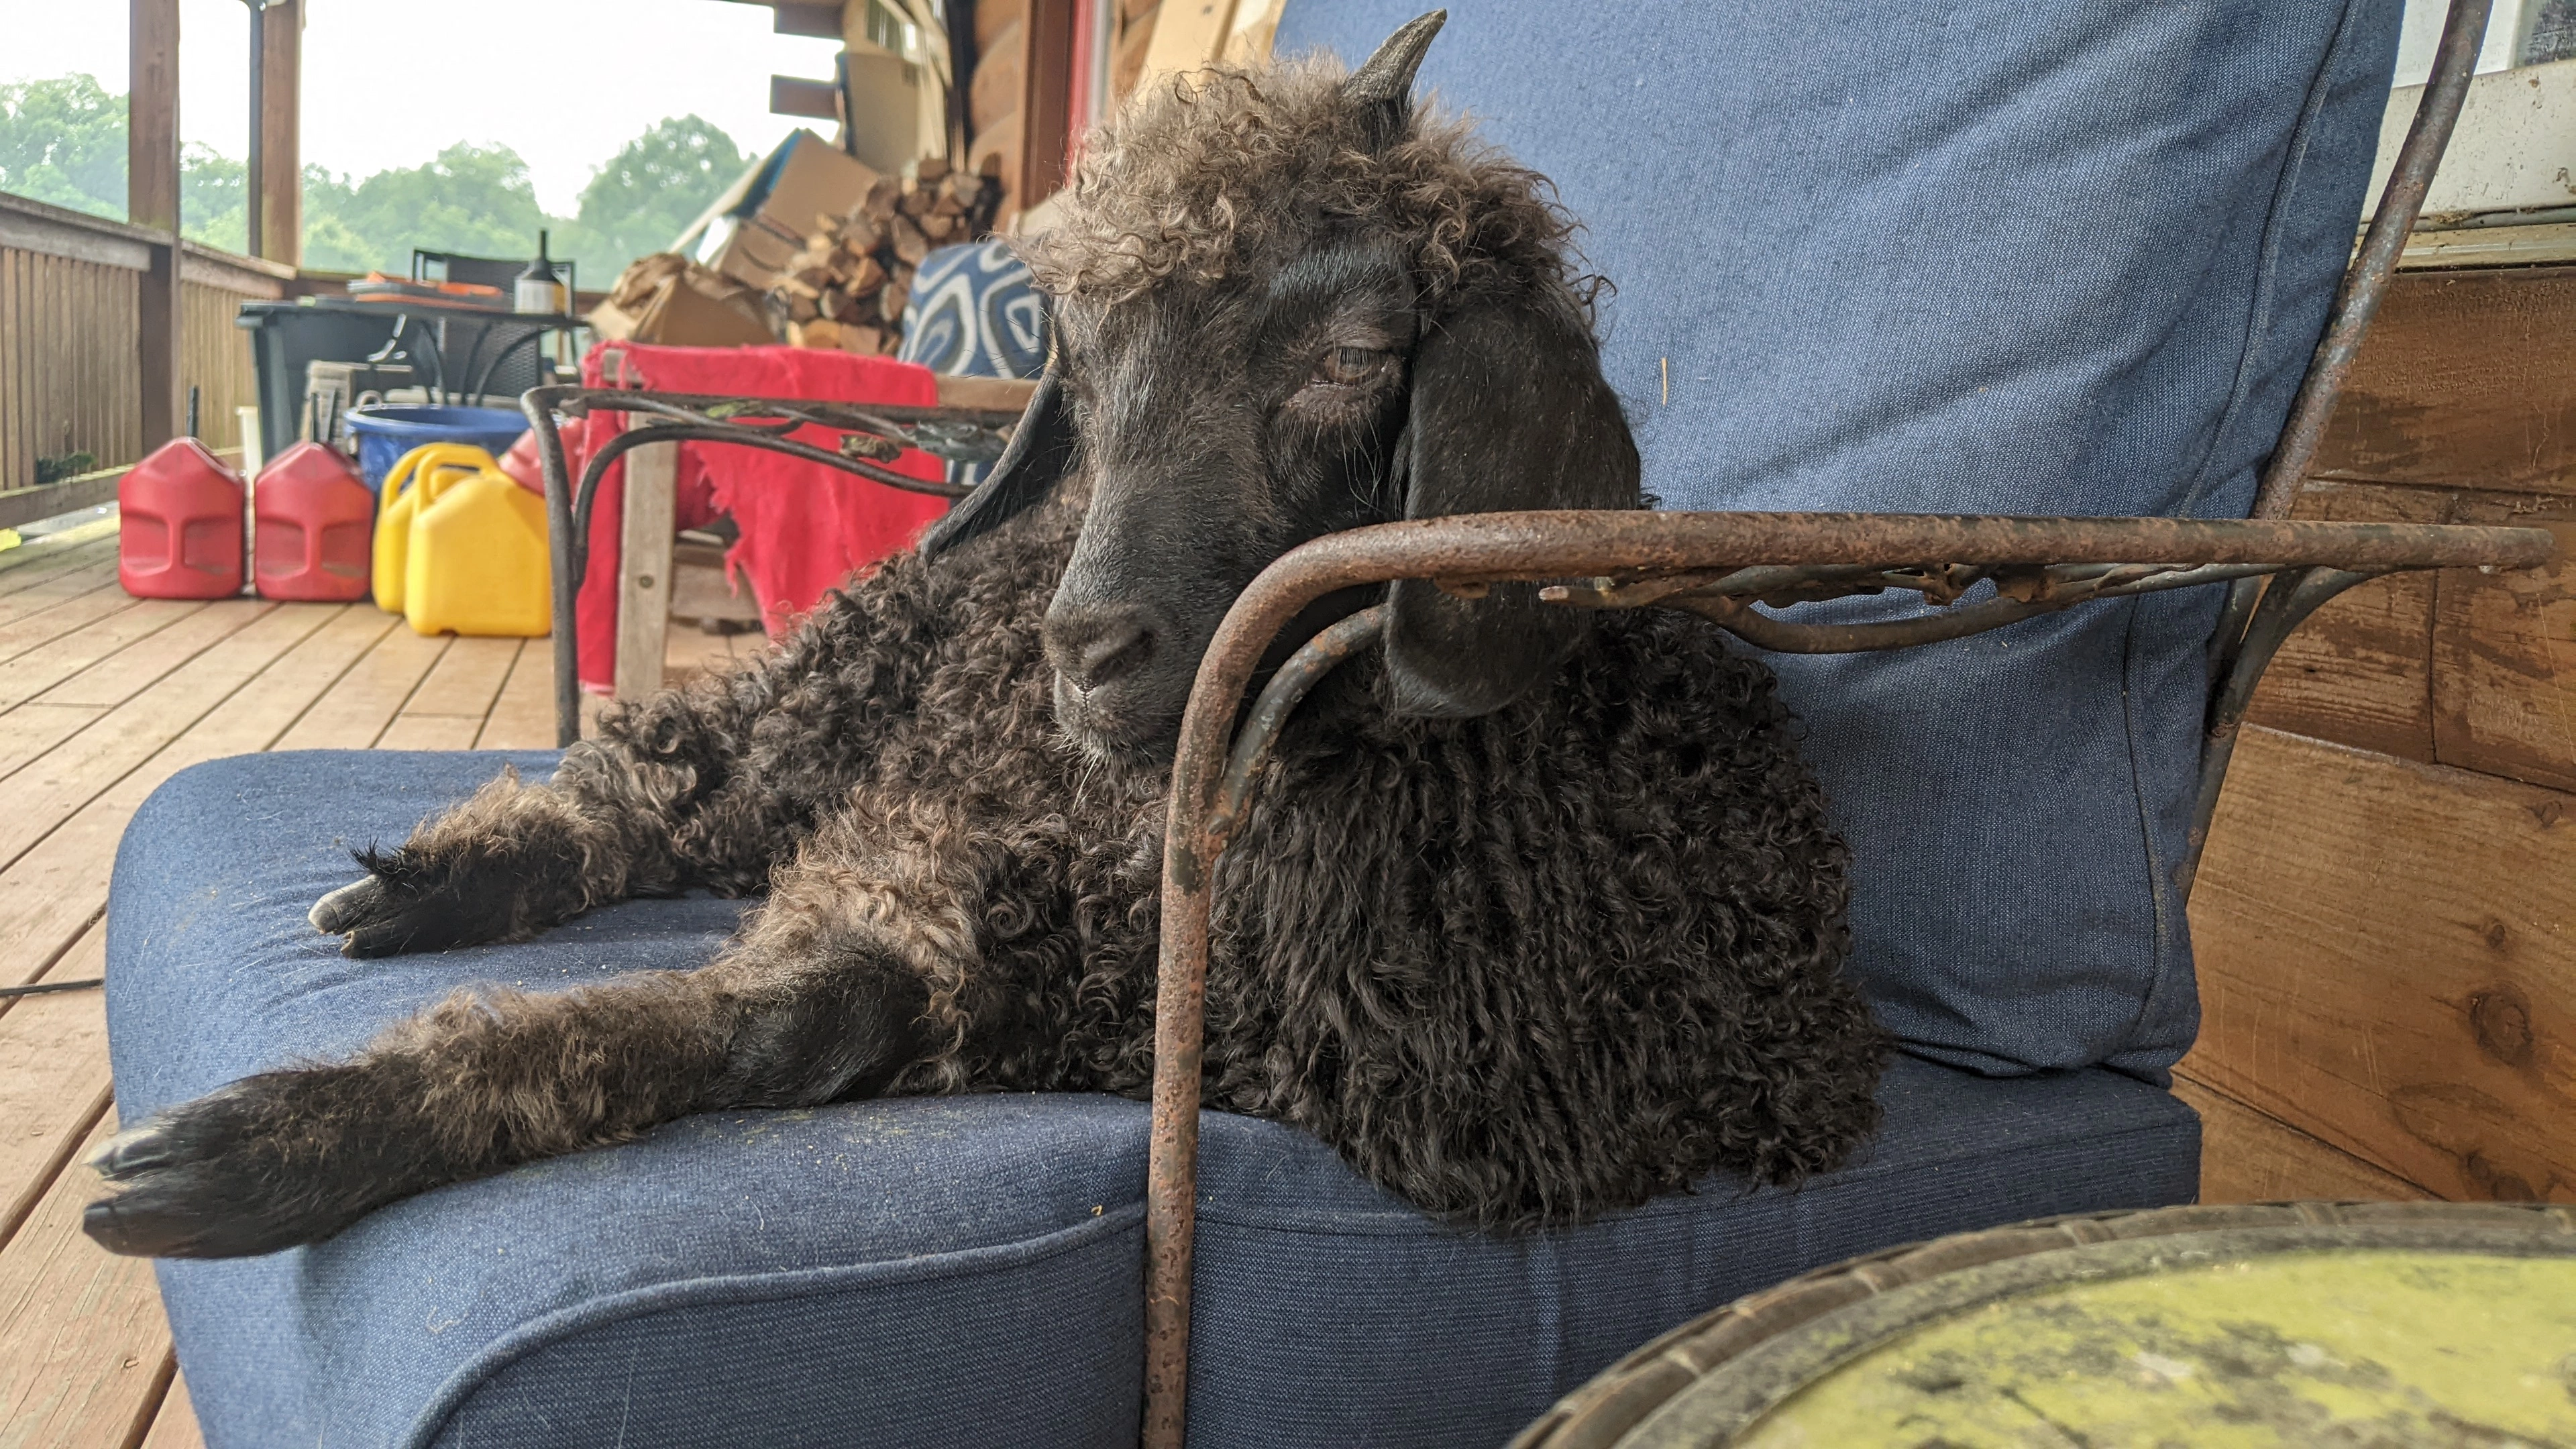 An image of a goat named Teff relaxing on a chair on a porch